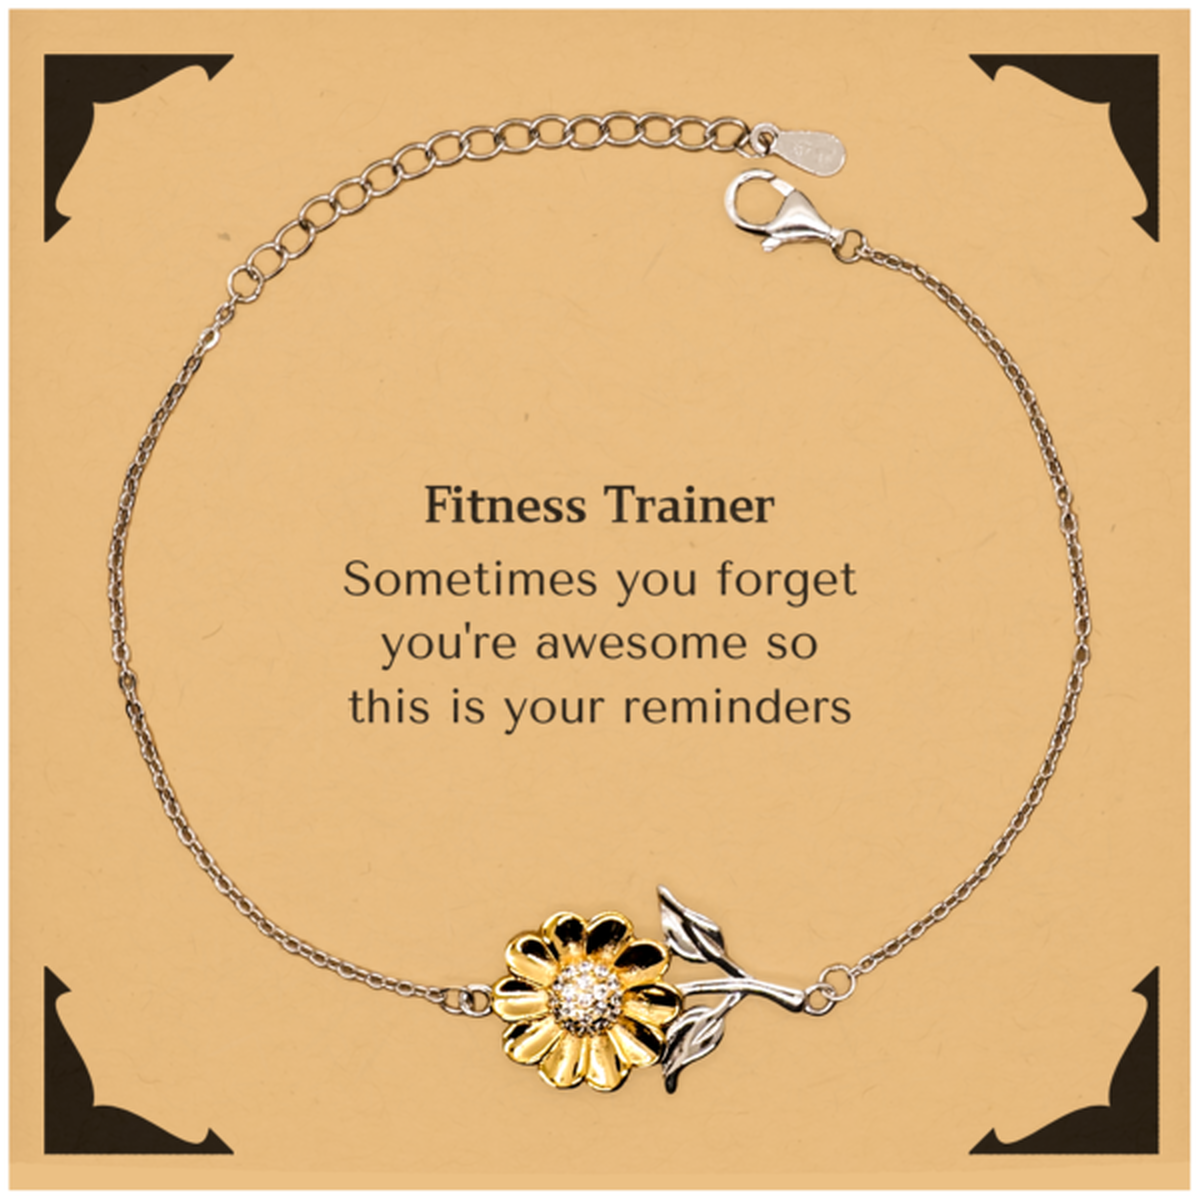 Sentimental Fitness Trainer Sunflower Bracelet, Fitness Trainer Sometimes you forget you're awesome so this is your reminders, Graduation Christmas Birthday Gifts for Fitness Trainer, Men, Women, Coworkers